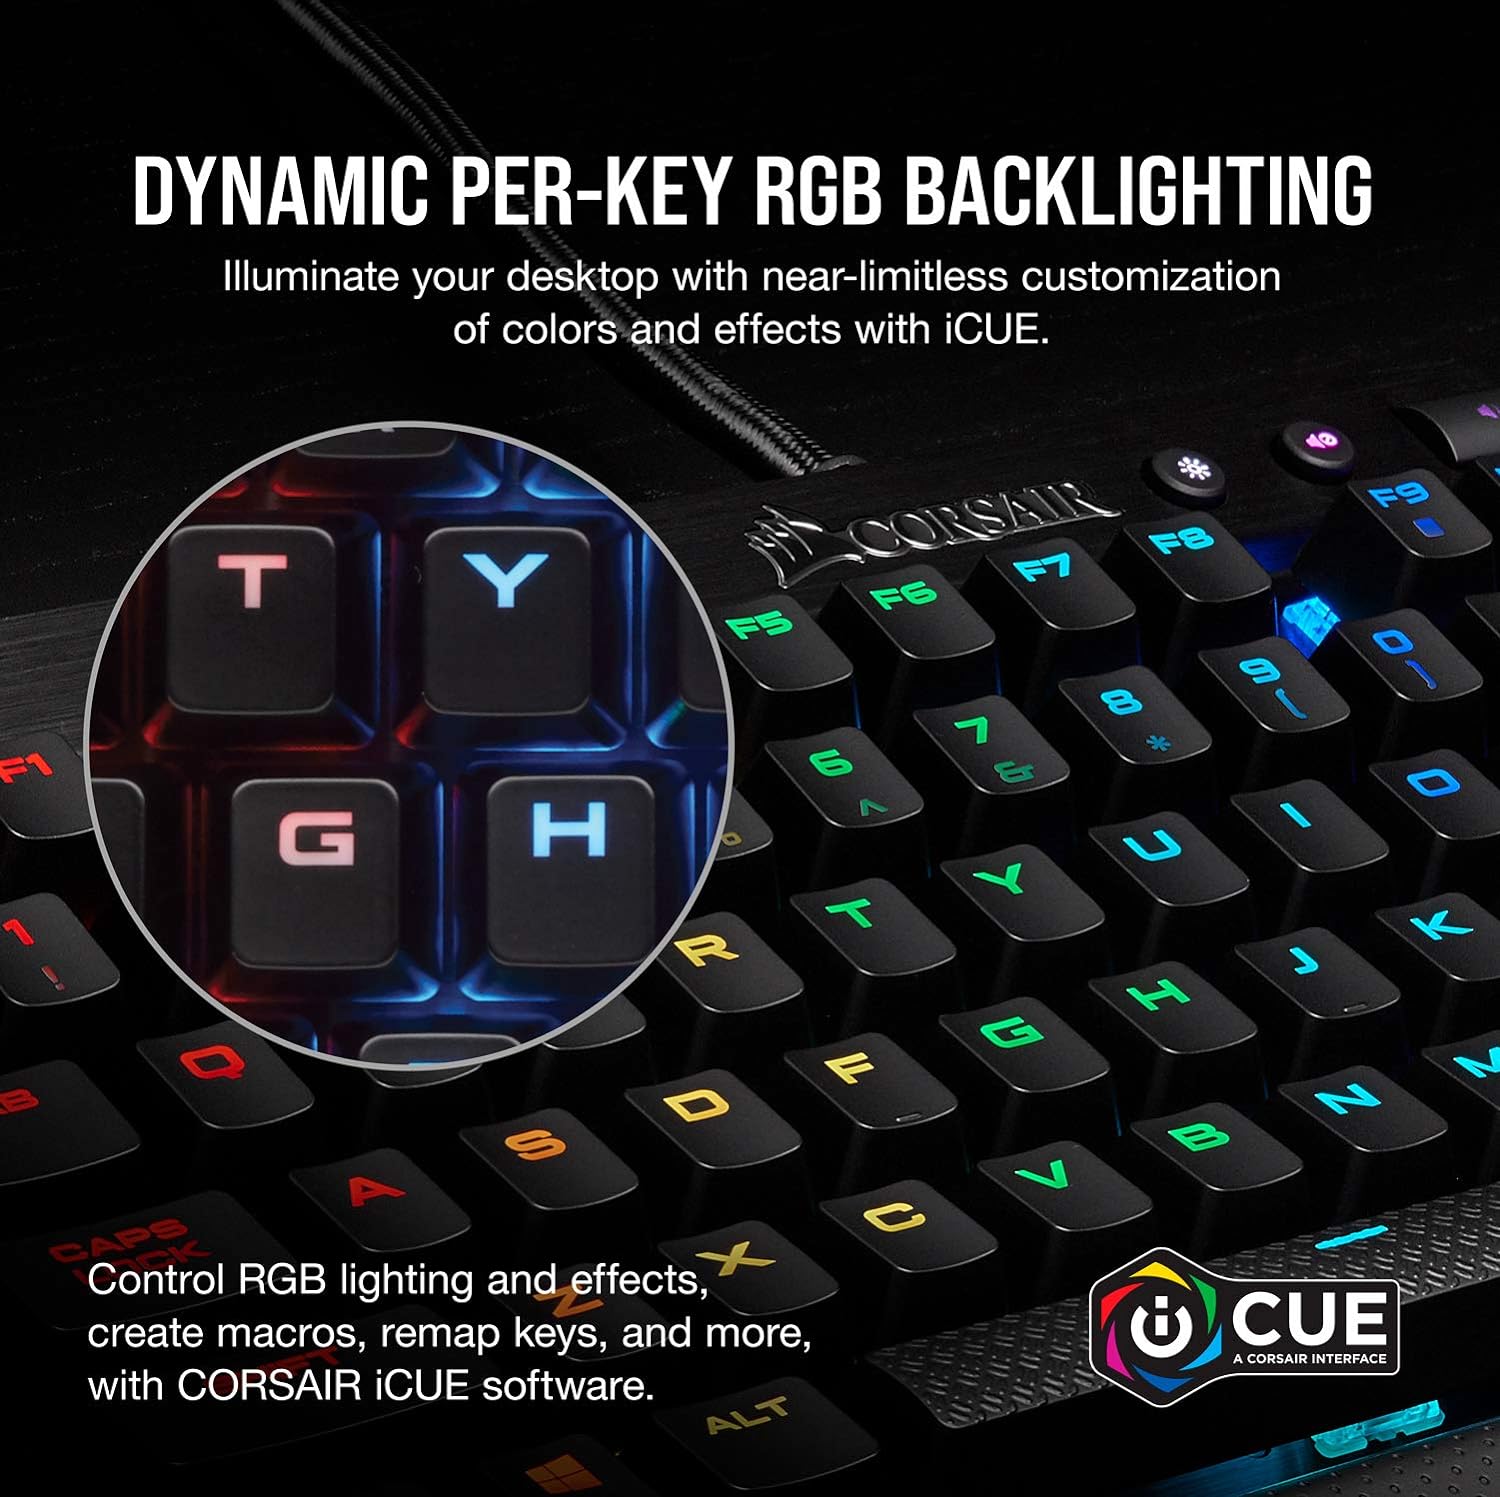 Corsair K65 RGB Rapidfire Mechanical Keyboard - Vibrant multi-color backlighting and large font keycaps for enhanced visibility. 0843591082181